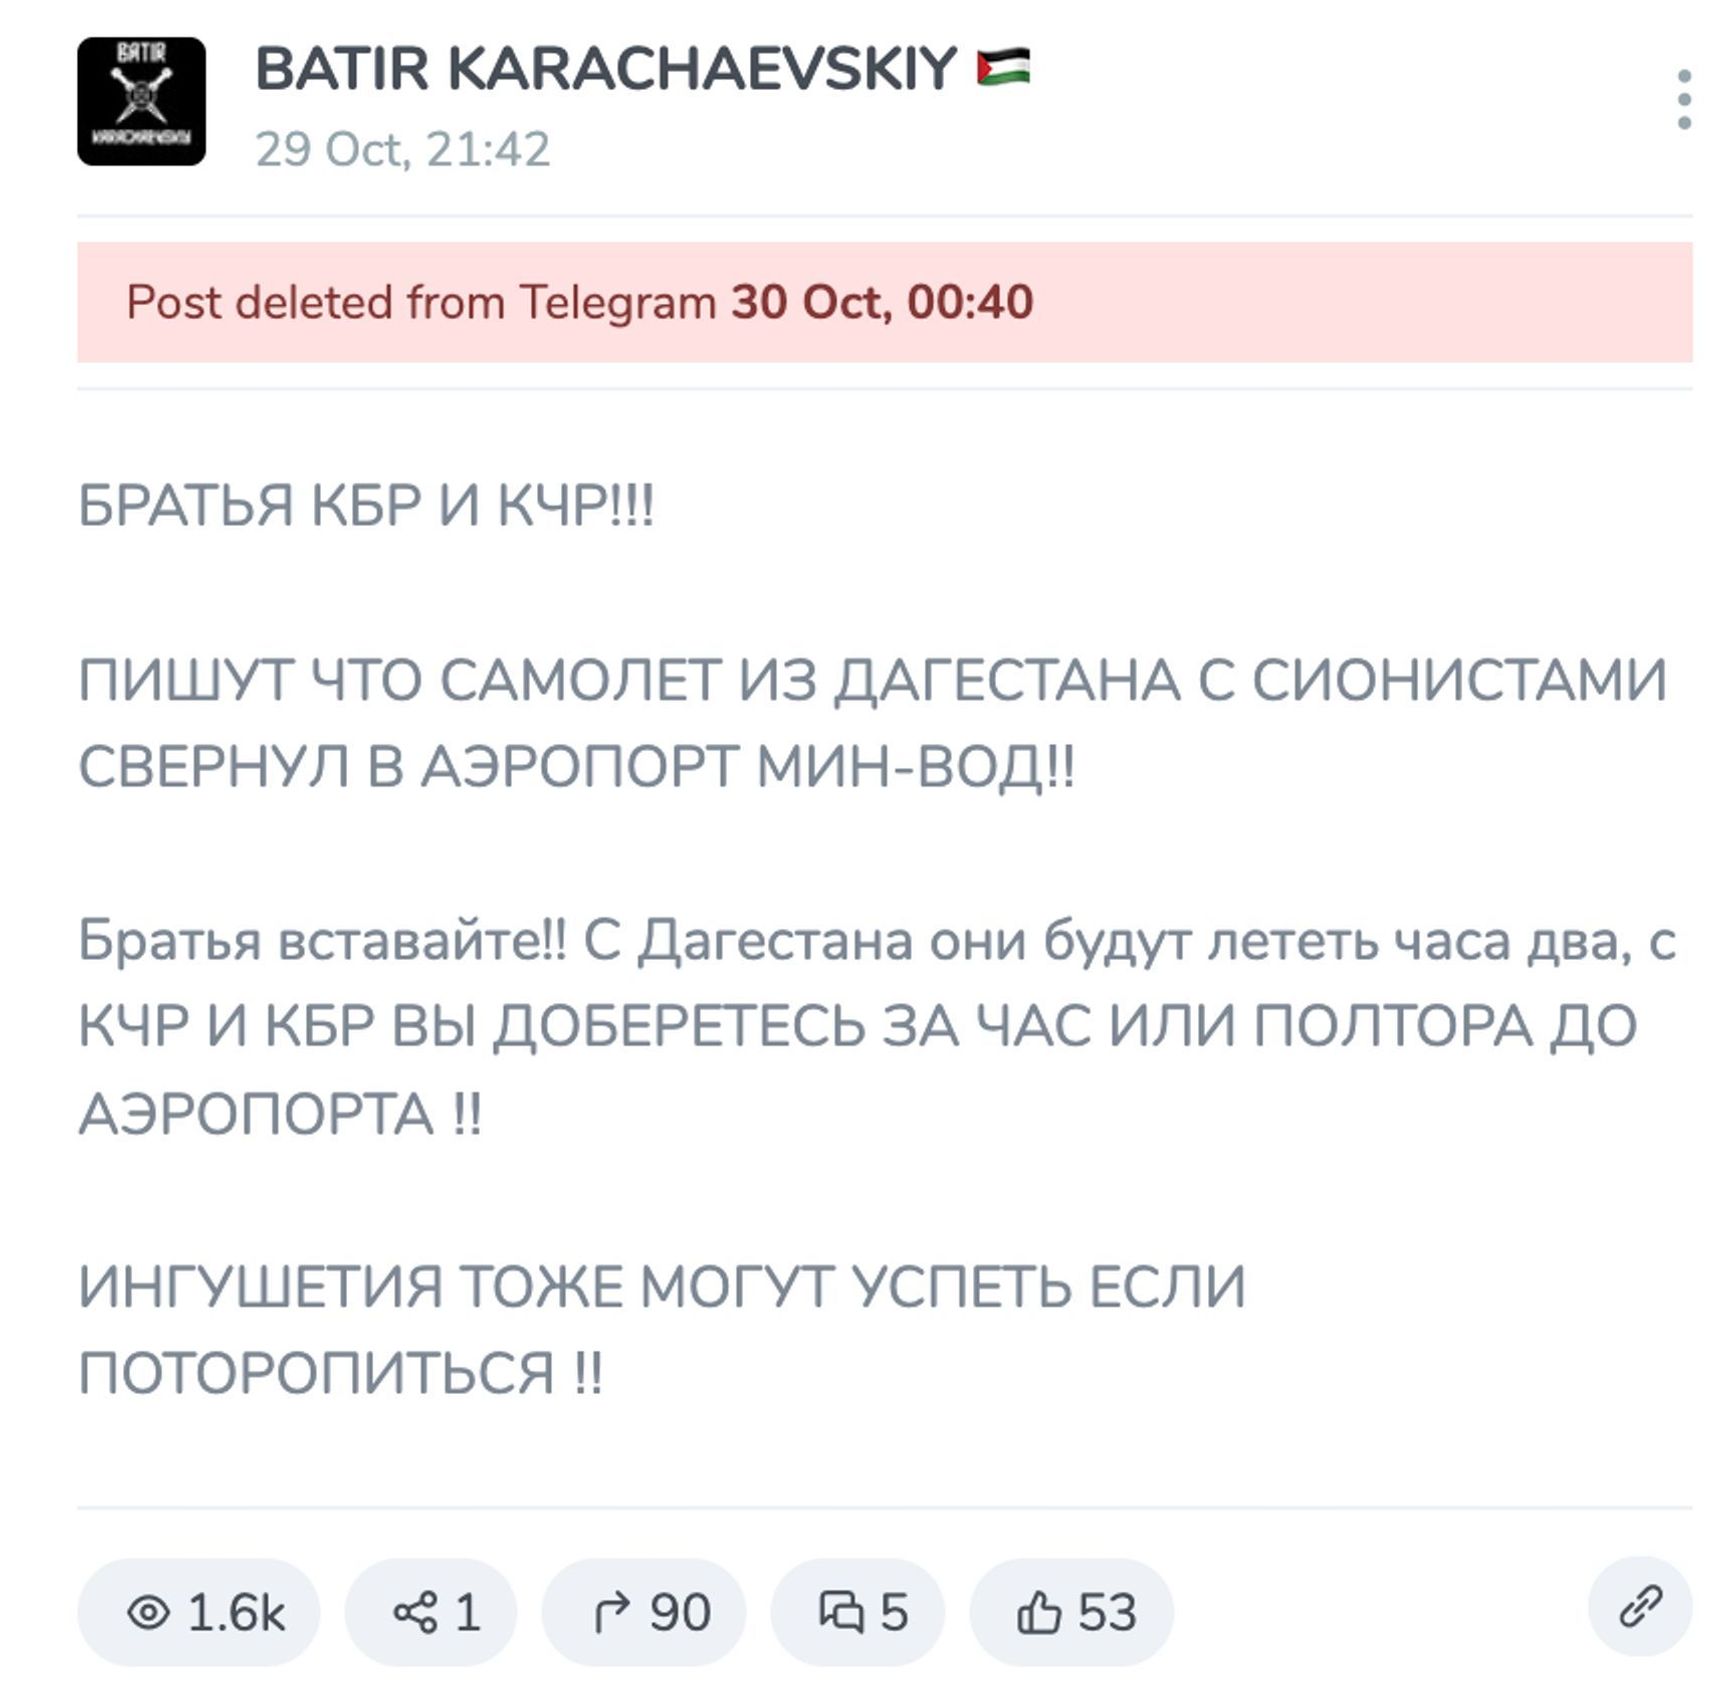 Brothers of Kabardino-Balkaria and Karachay-Cherkessia! They say that a plane from Dagestan with Zionists turned into Mineralnye Vody airport! Brothers, get up! From Dagestan they will fly for two hours, from Karachay-Cherkessia and Kabardino-Balkaria you will get to the airport in an hour or an hour and a half! Ingushetia can also make it if they hurry up!